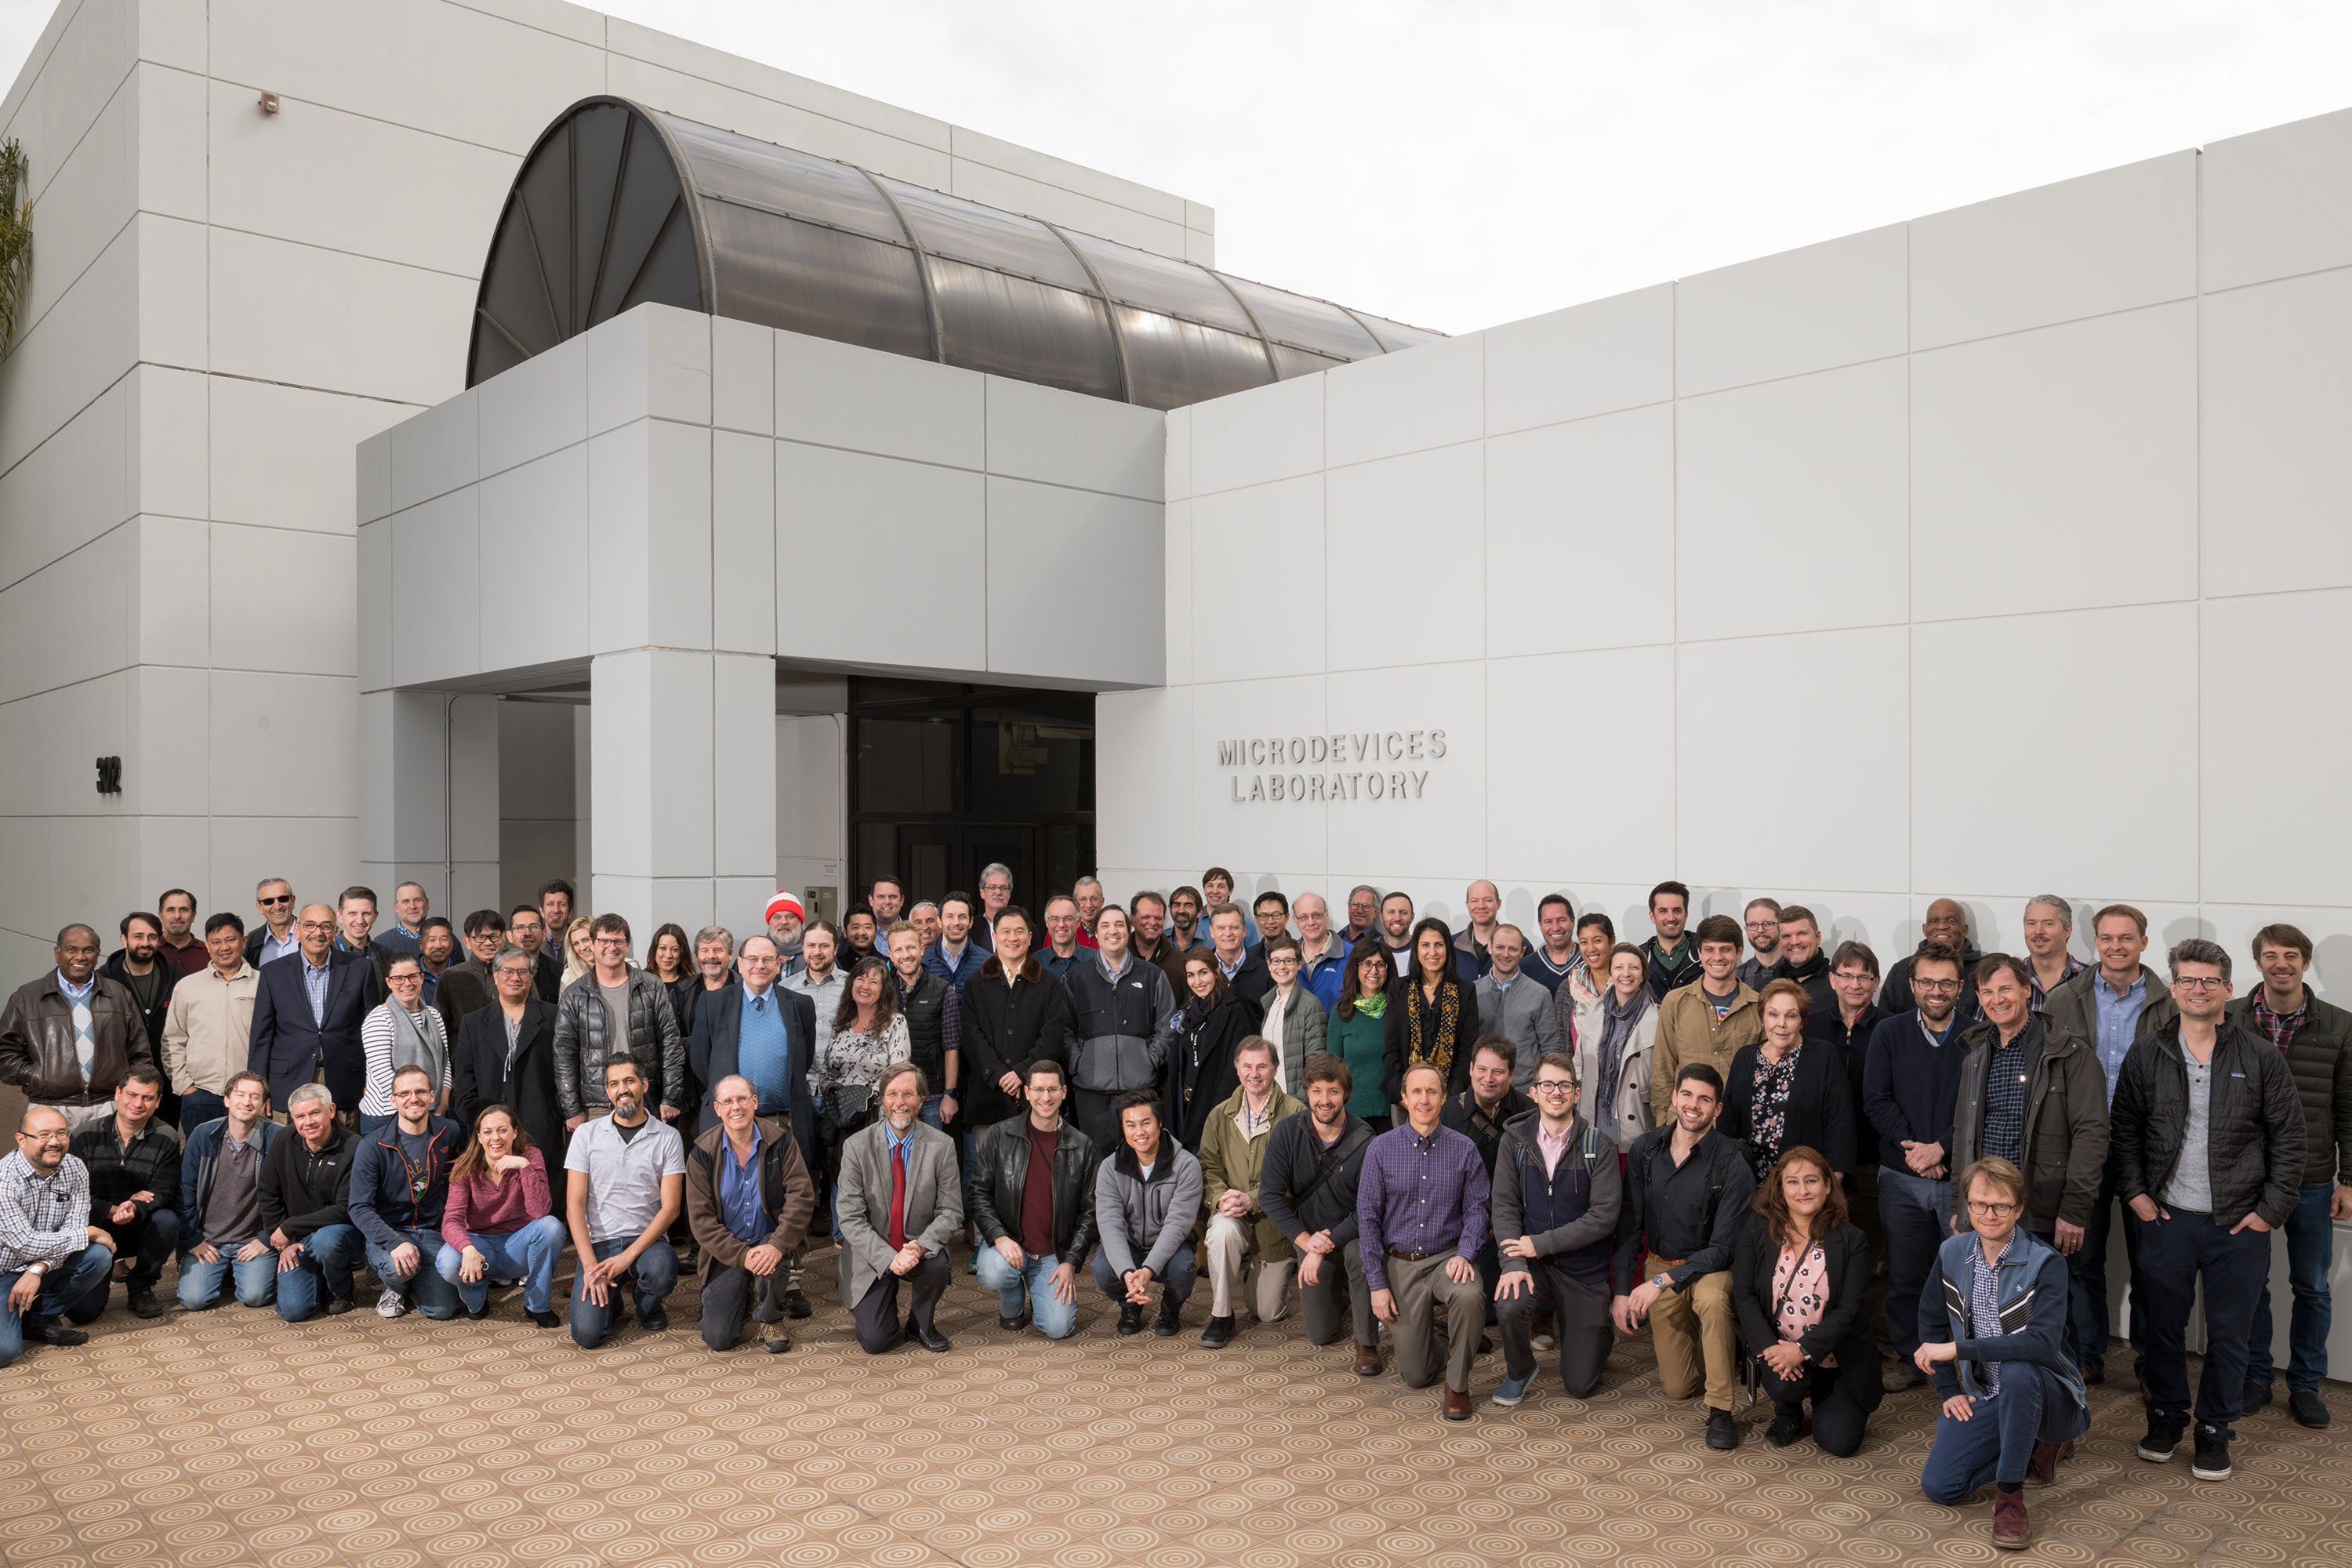 Group photo outside the Microdevices Laboratory building